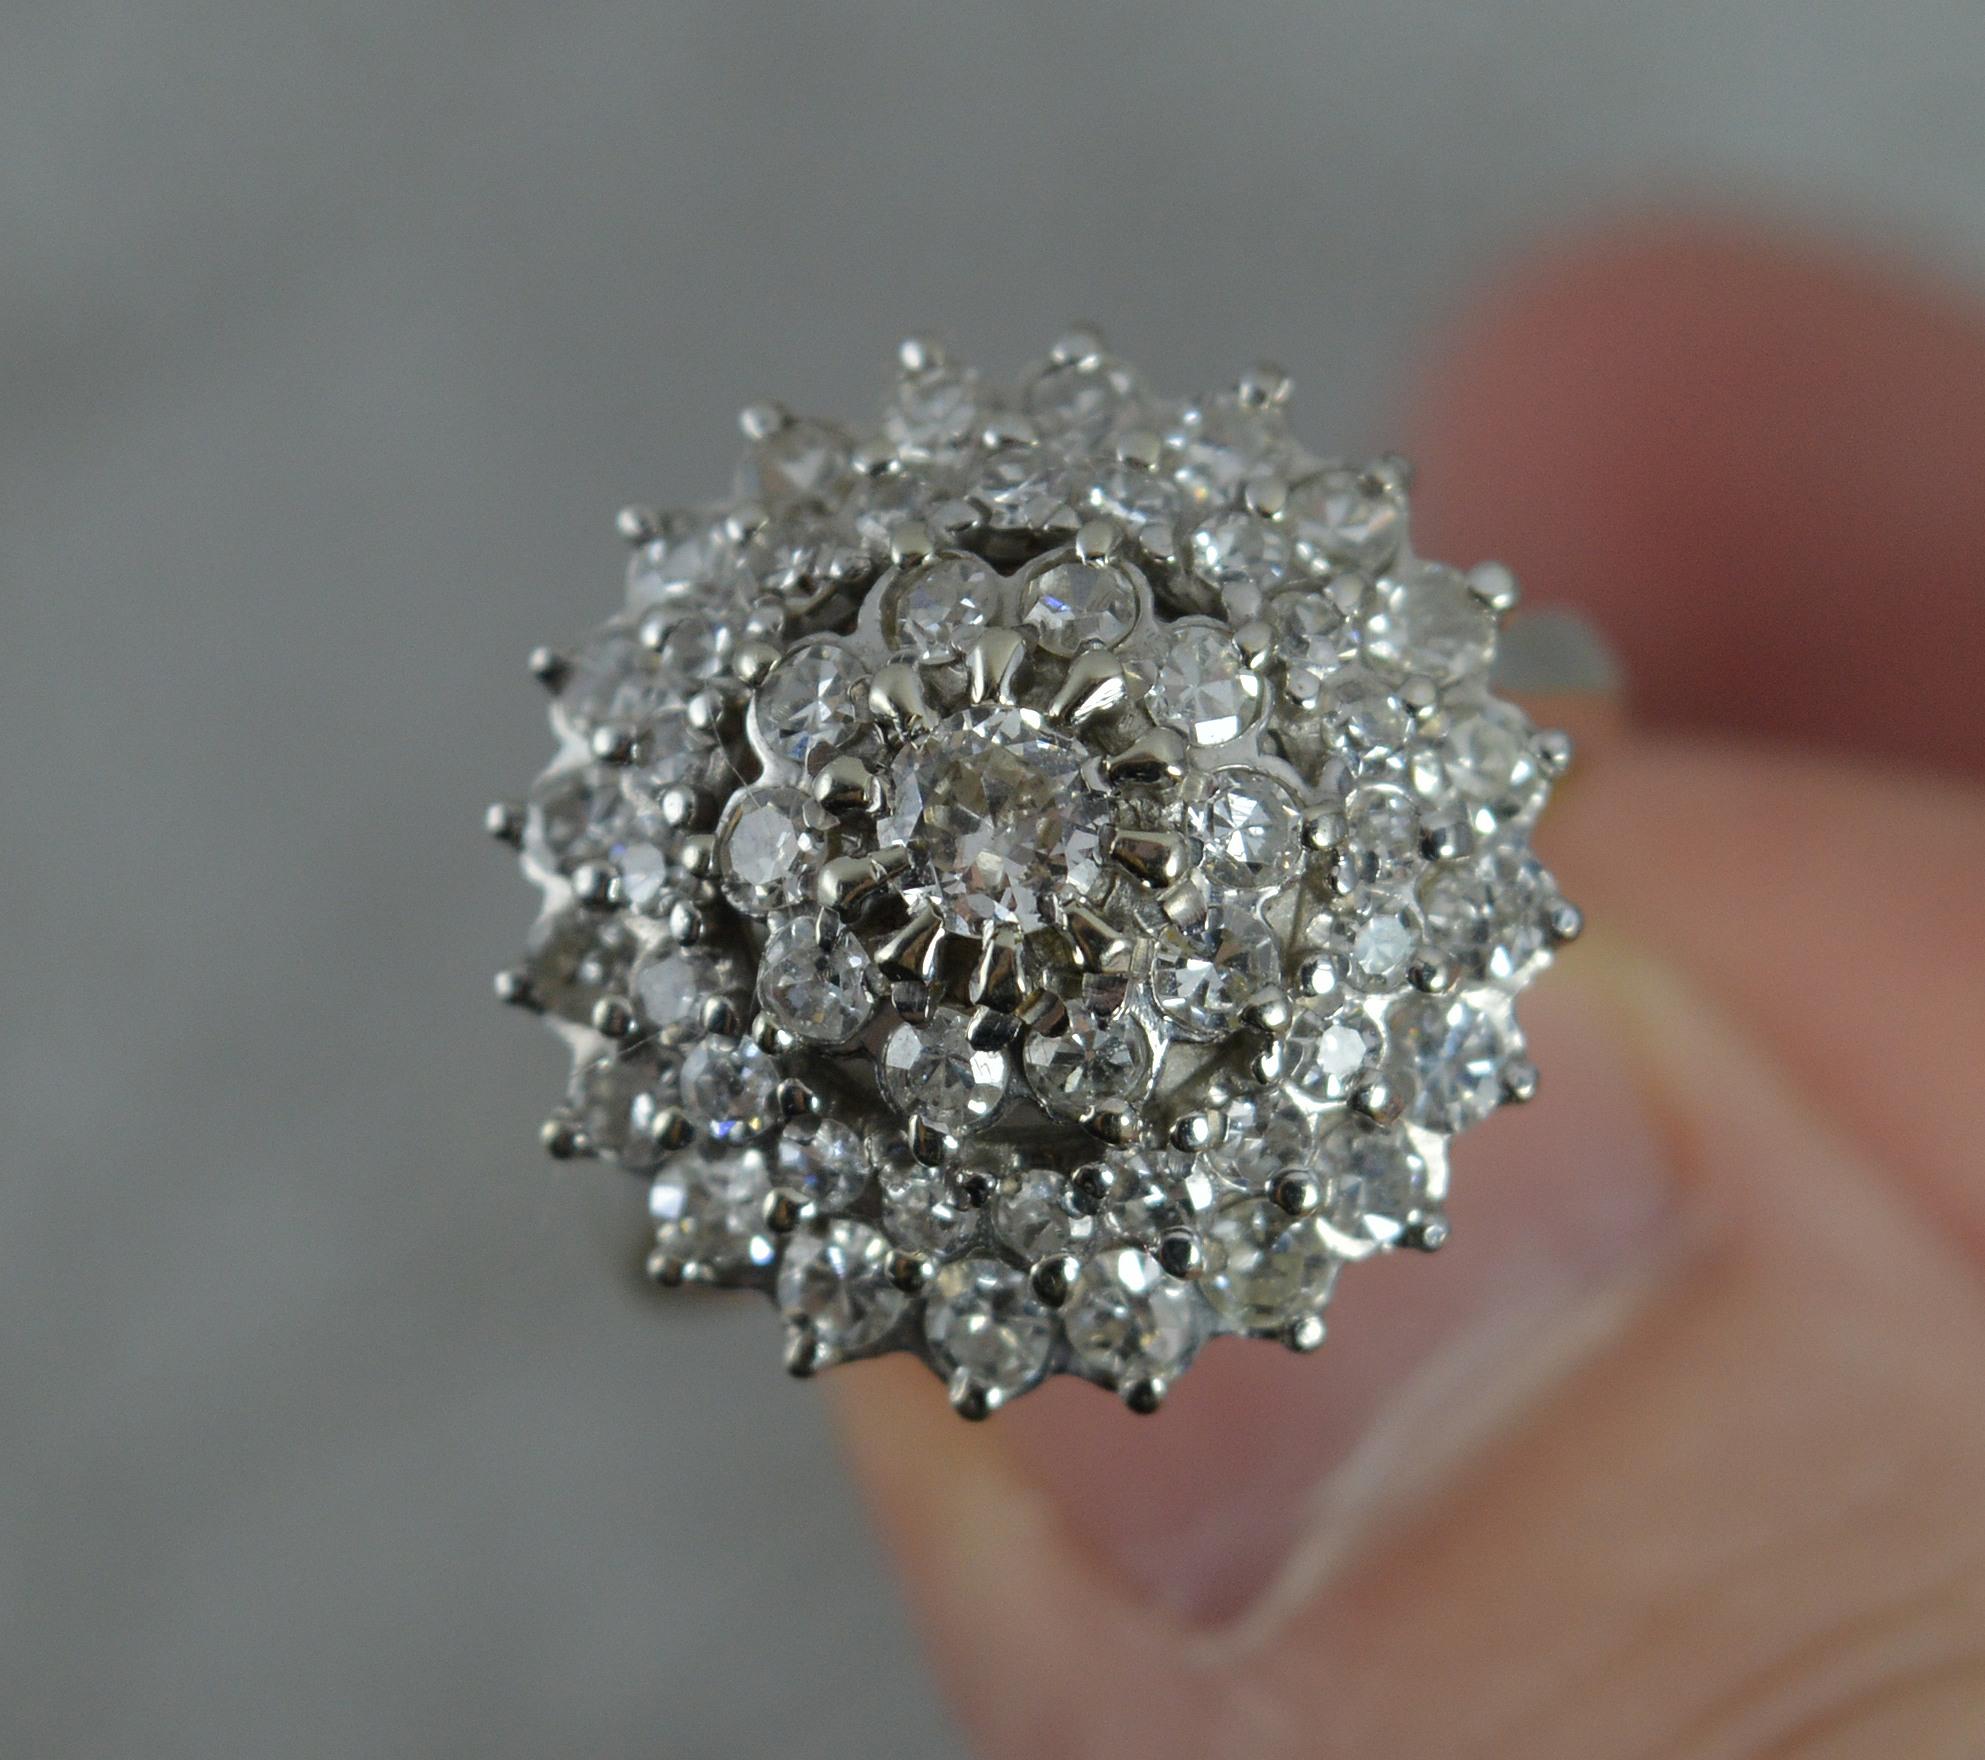 An impressive sparkly 18ct gold and diamond cluster ring.
Solid 18 carat white gold example.
Set with many natural, round brilliant cut diamonds forming a four tier head.
17mm x 17mm cluster head. 1.4 carat total diamond weight. Clean and sparkly.